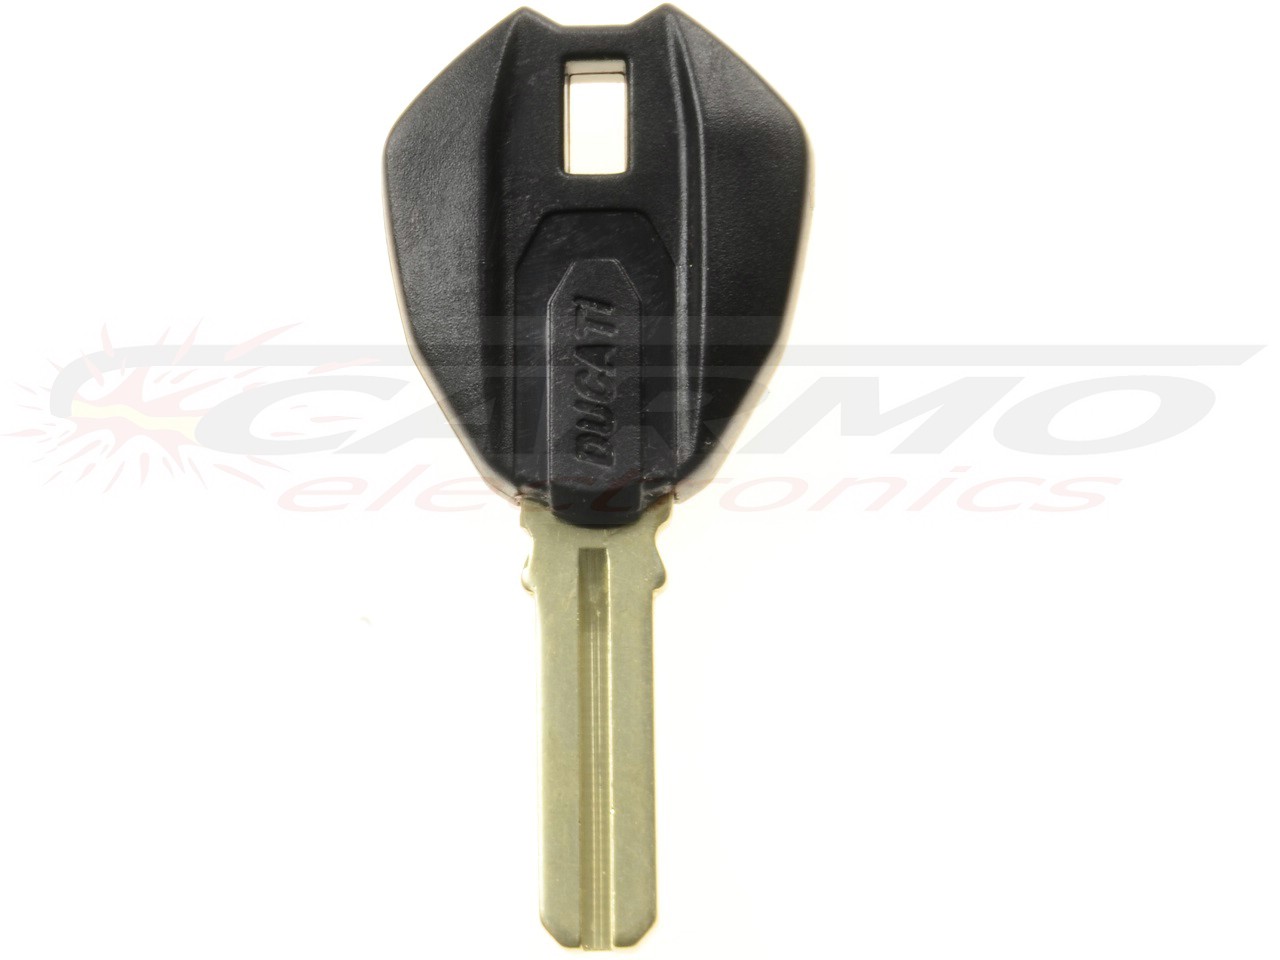 Ducati Panigale chip key - Click Image to Close